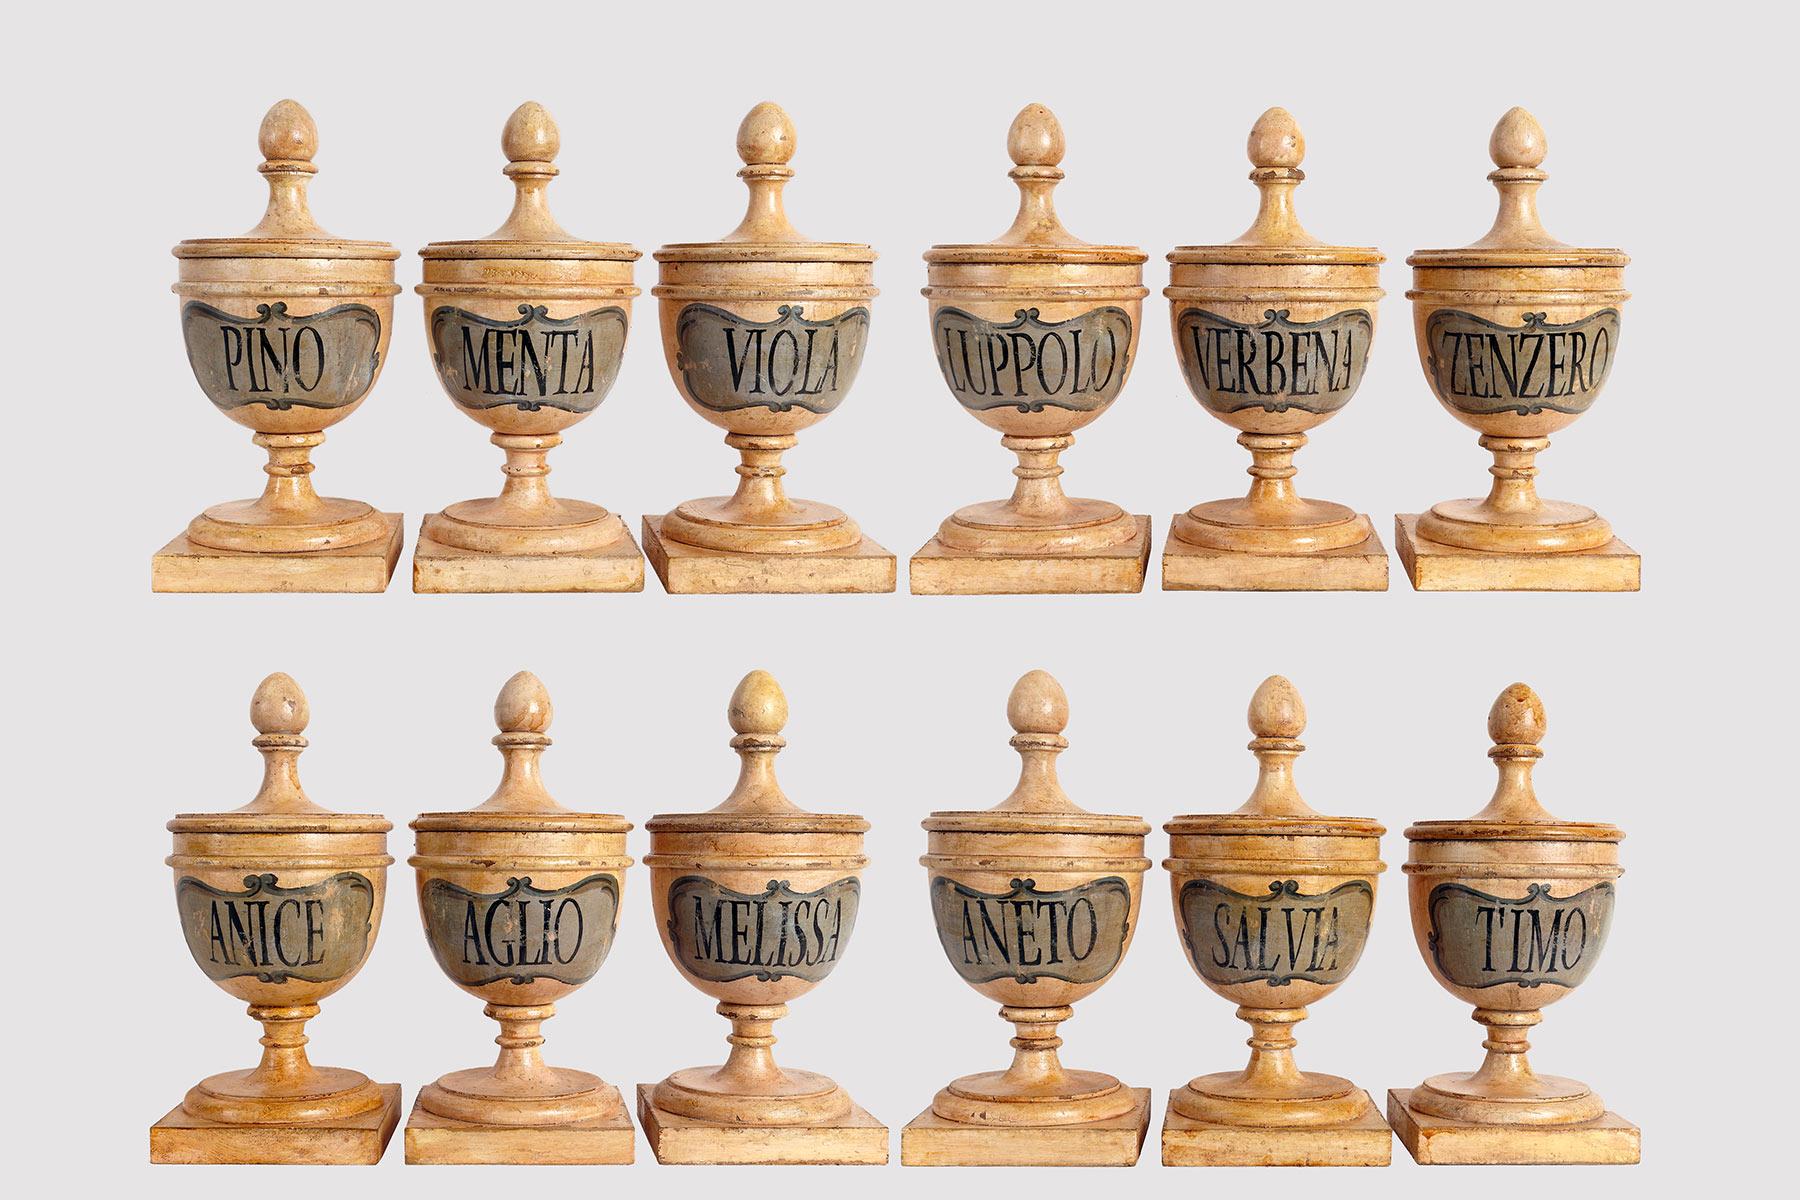 Set of nine medium-sized wooden pharmacy-herbal jars (Pine, Mint, Viola, Hops, Verbena, Ginger, Anise, Garlic, Melissa, Dill, Sage, Thyme) in the purest neoclassical style. The surface is finished with a white pad with a blue scroll decoration, the